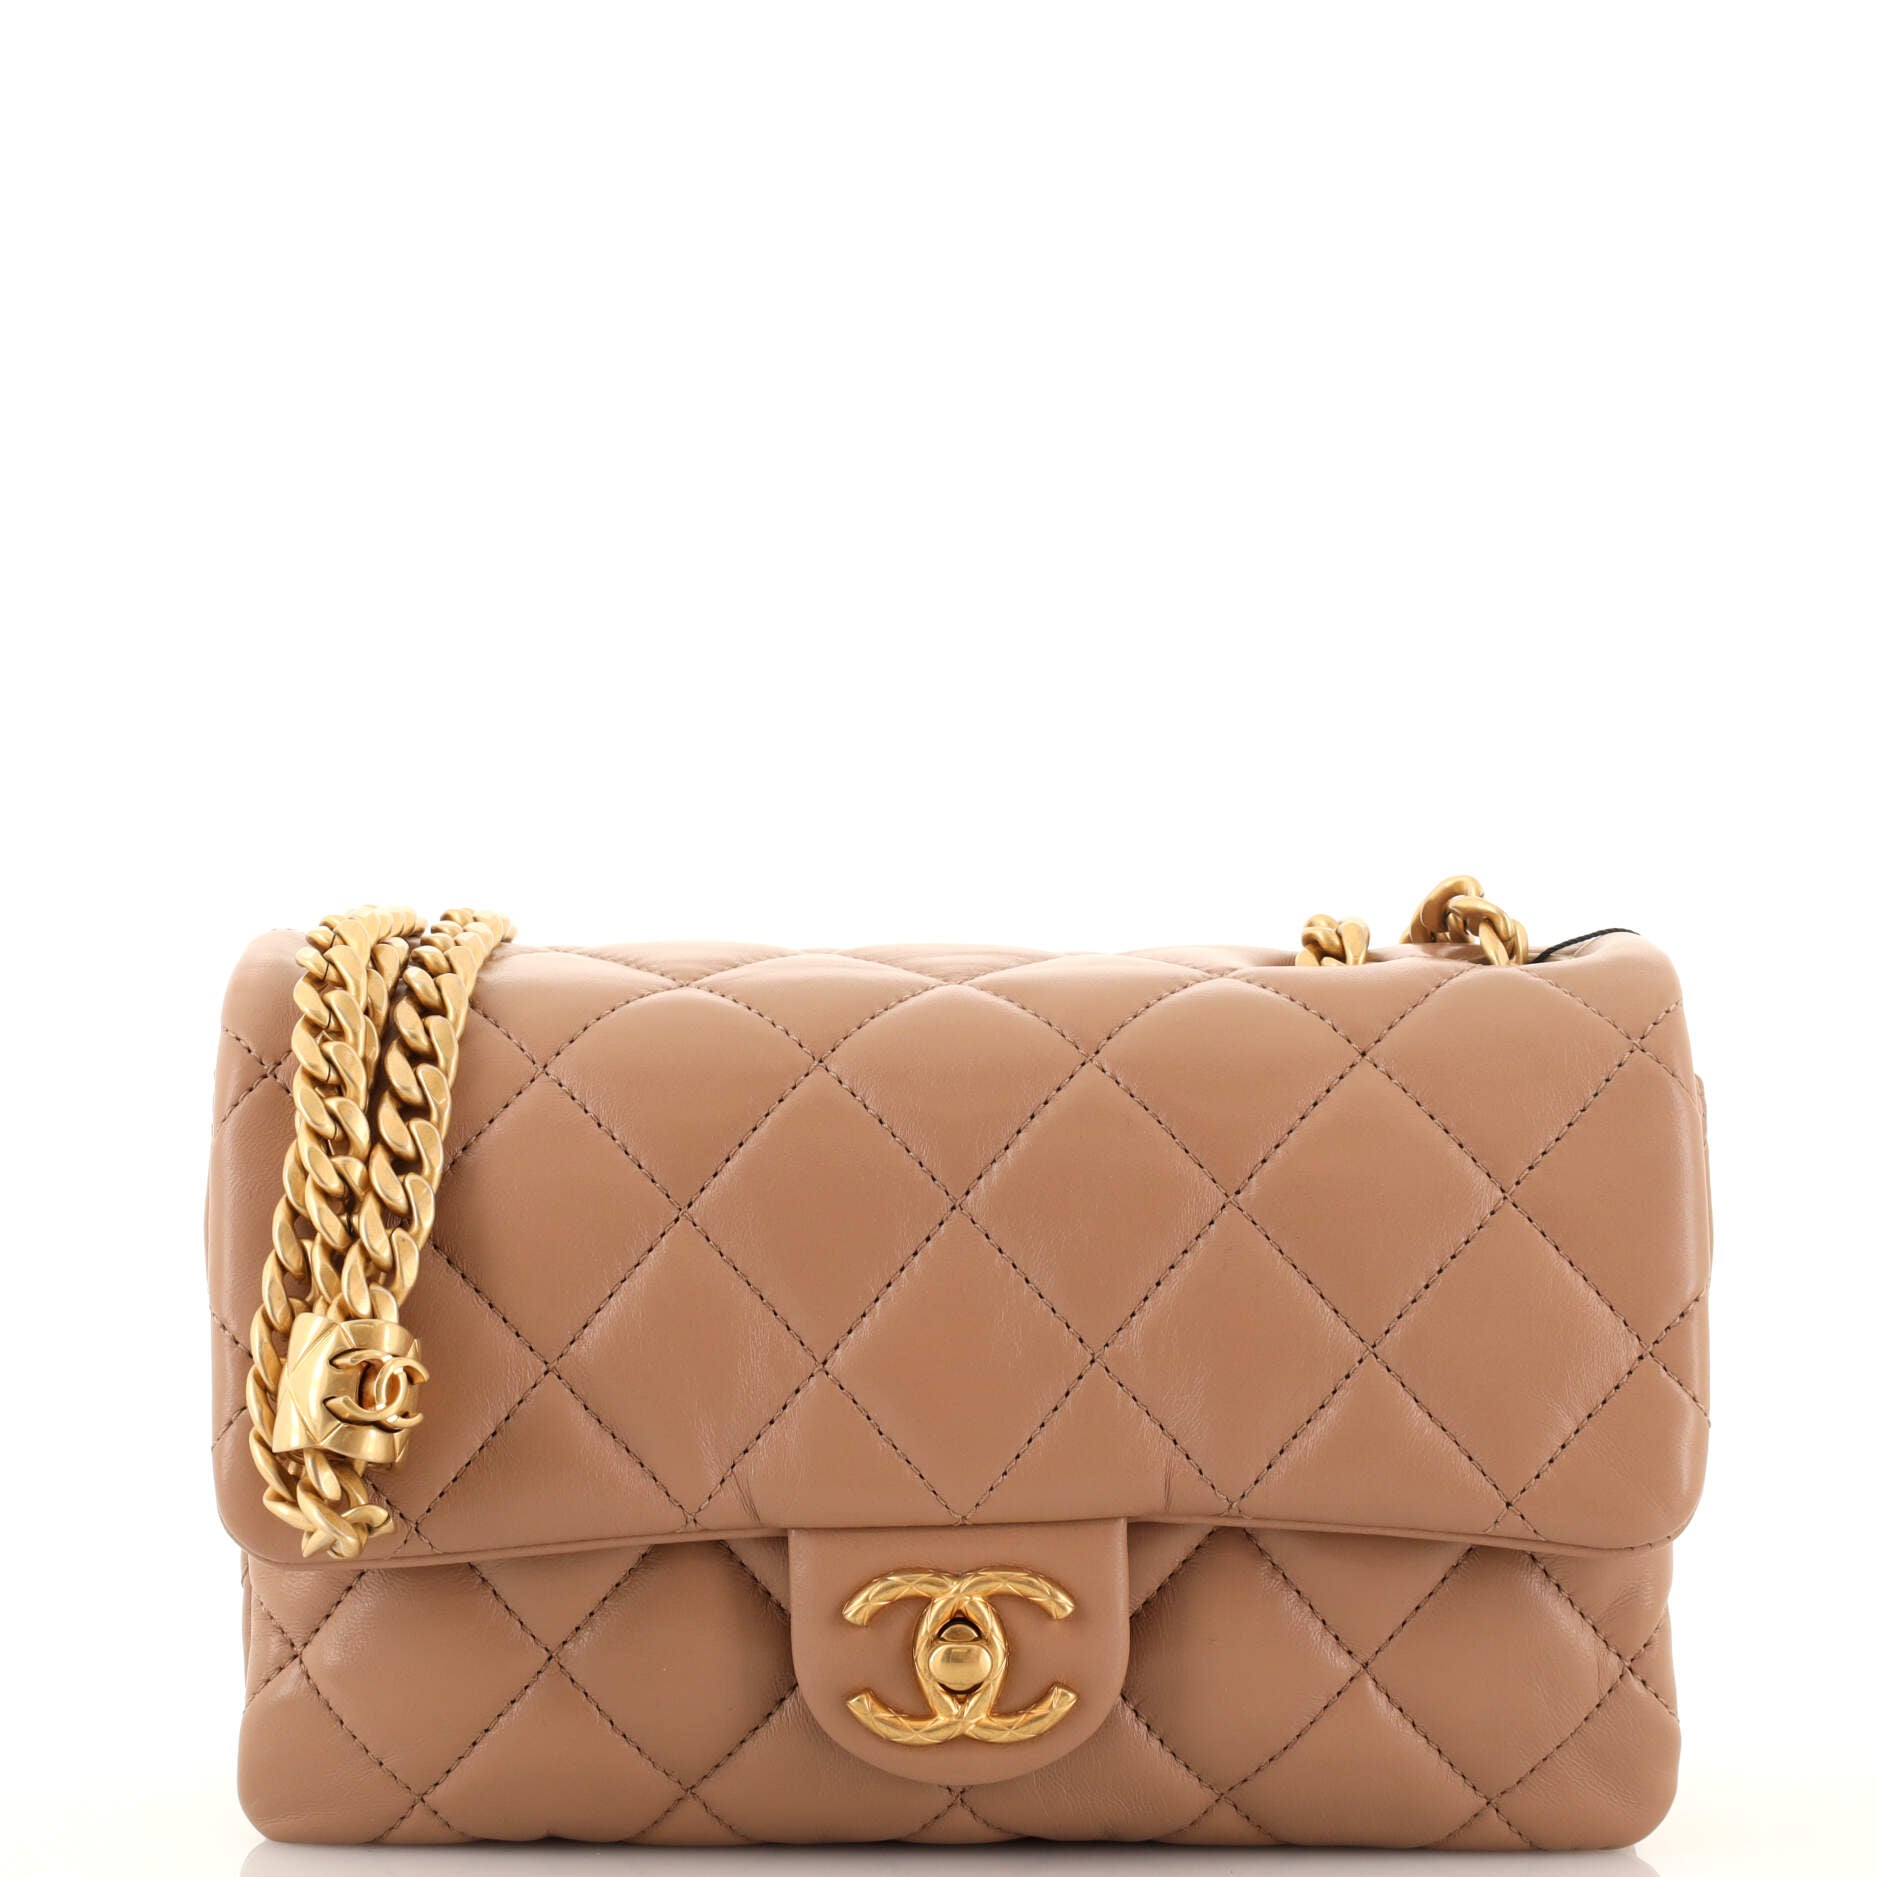 CHANEL VINTAGE BROWN QUILTED SUEDE LEATHER AND SHEARLING XL FLAP SHOULDER  BAG